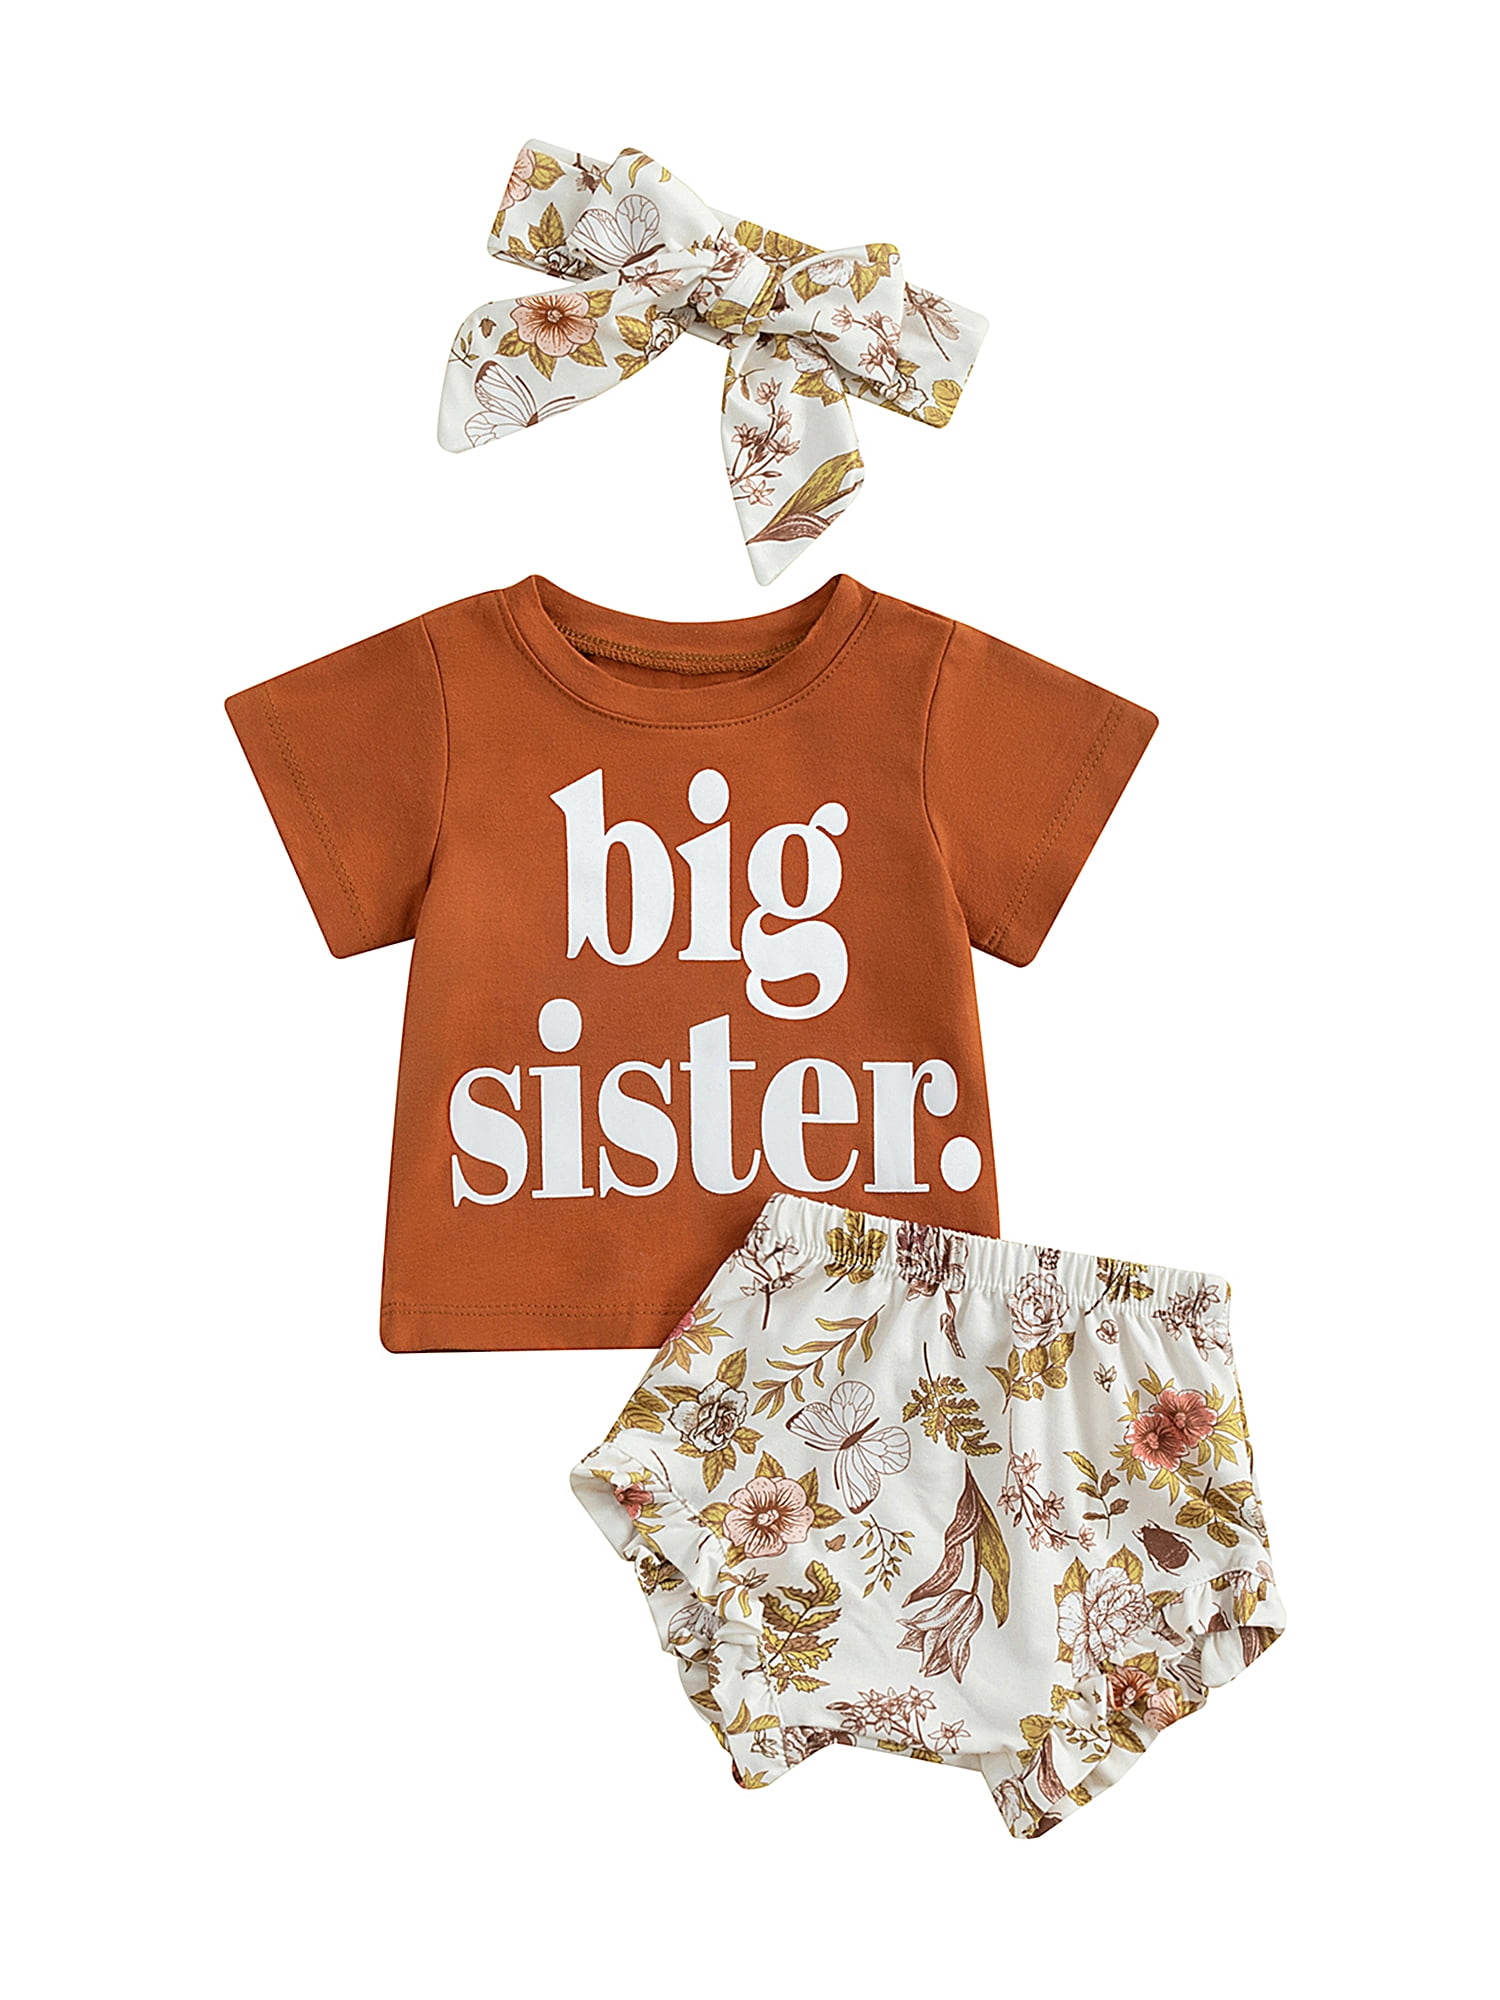 Sisters Matching Outfits Infant Toddler Kid Girls Tops T-Shirt Shorts Set/Dress